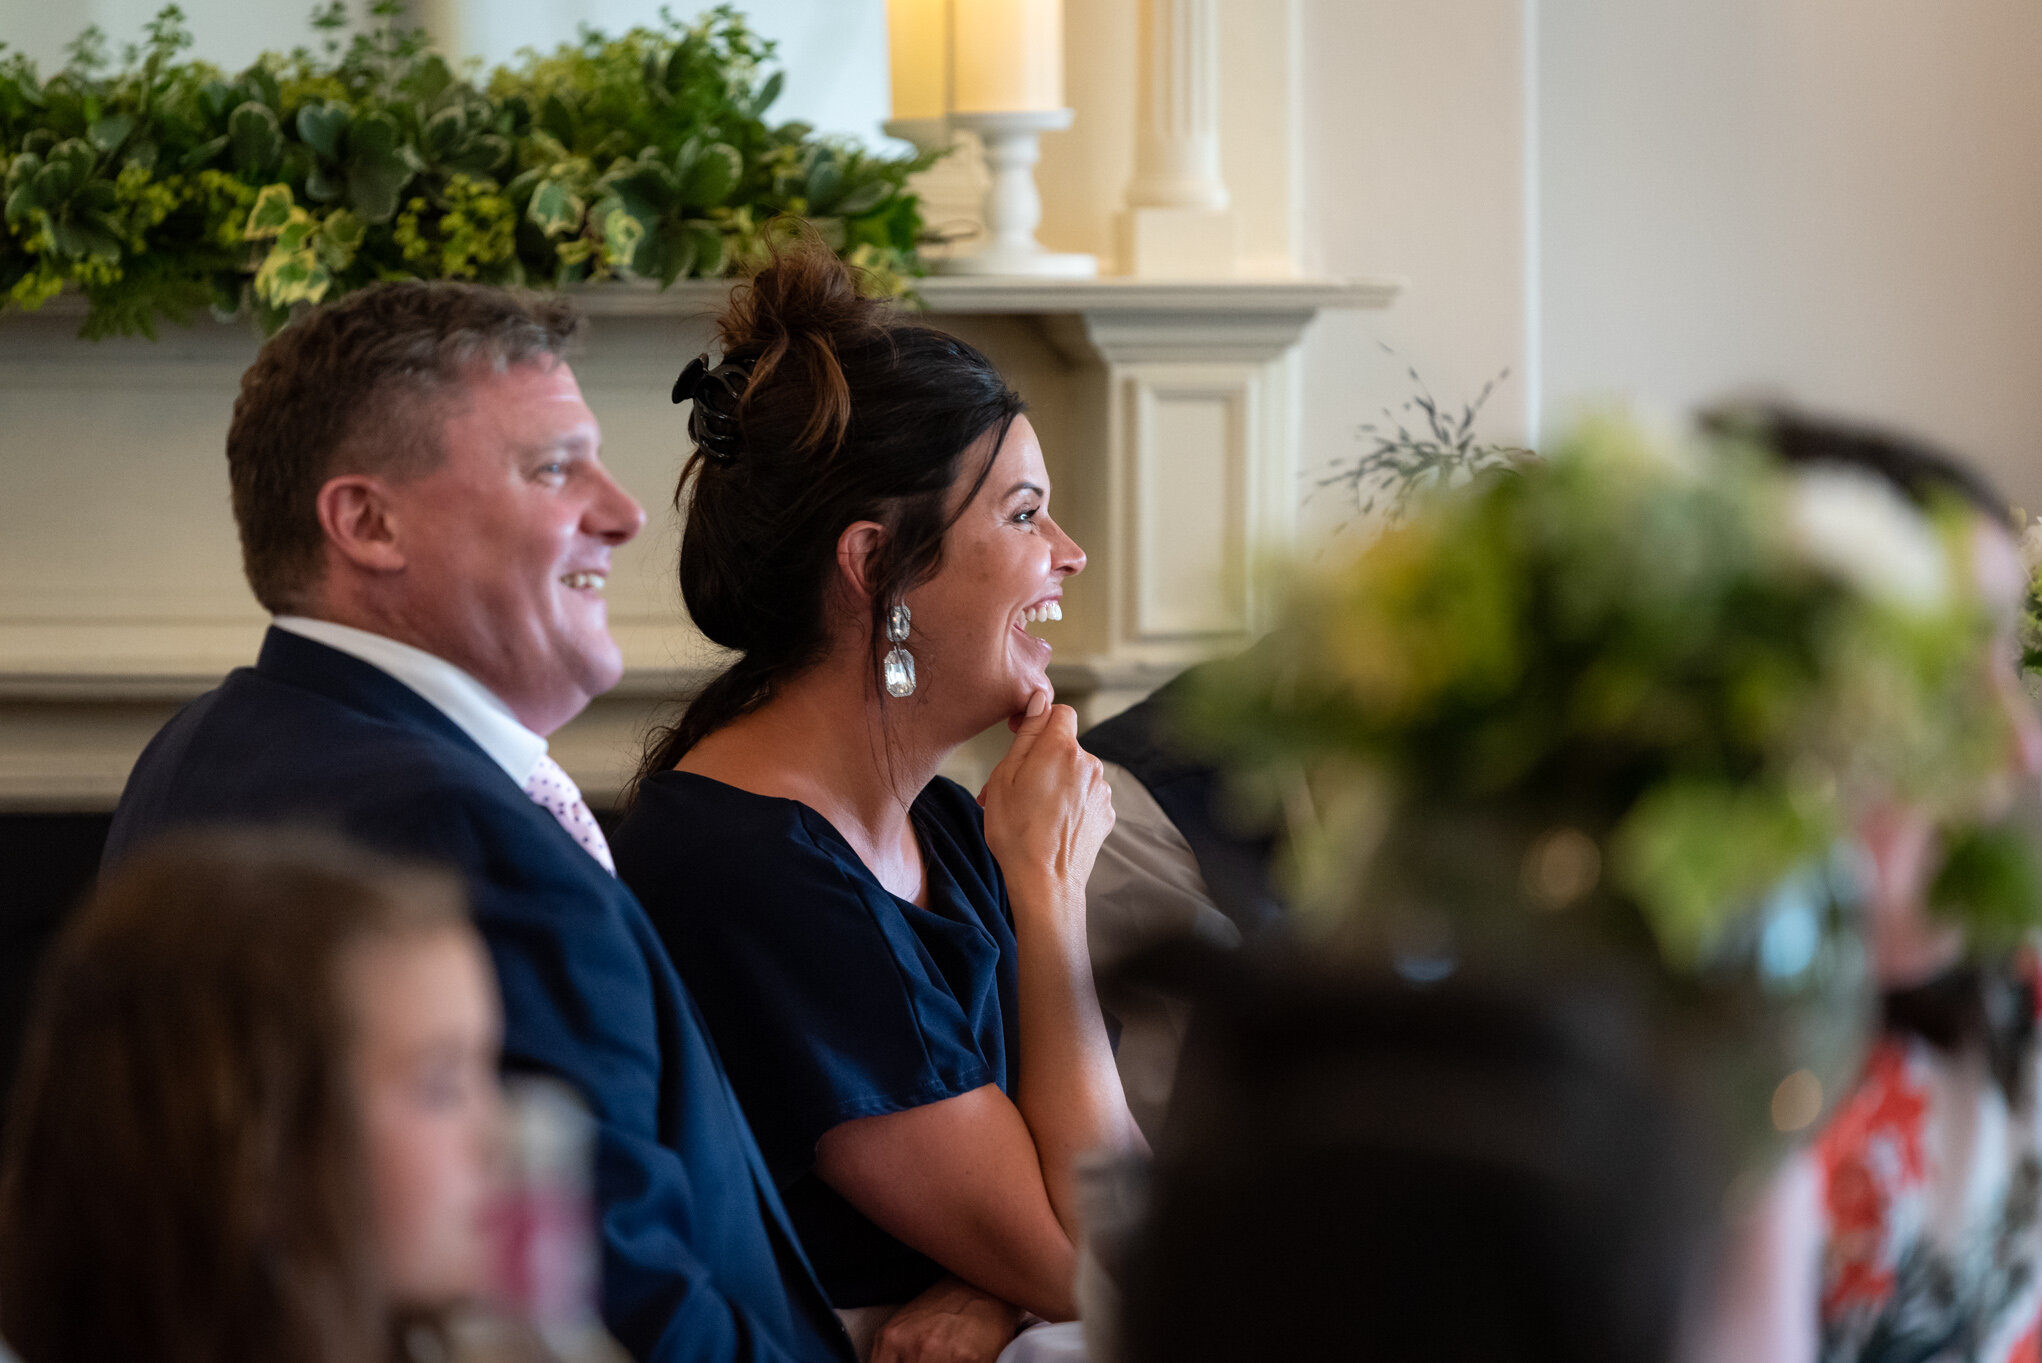 Guests laughing wedding speeches